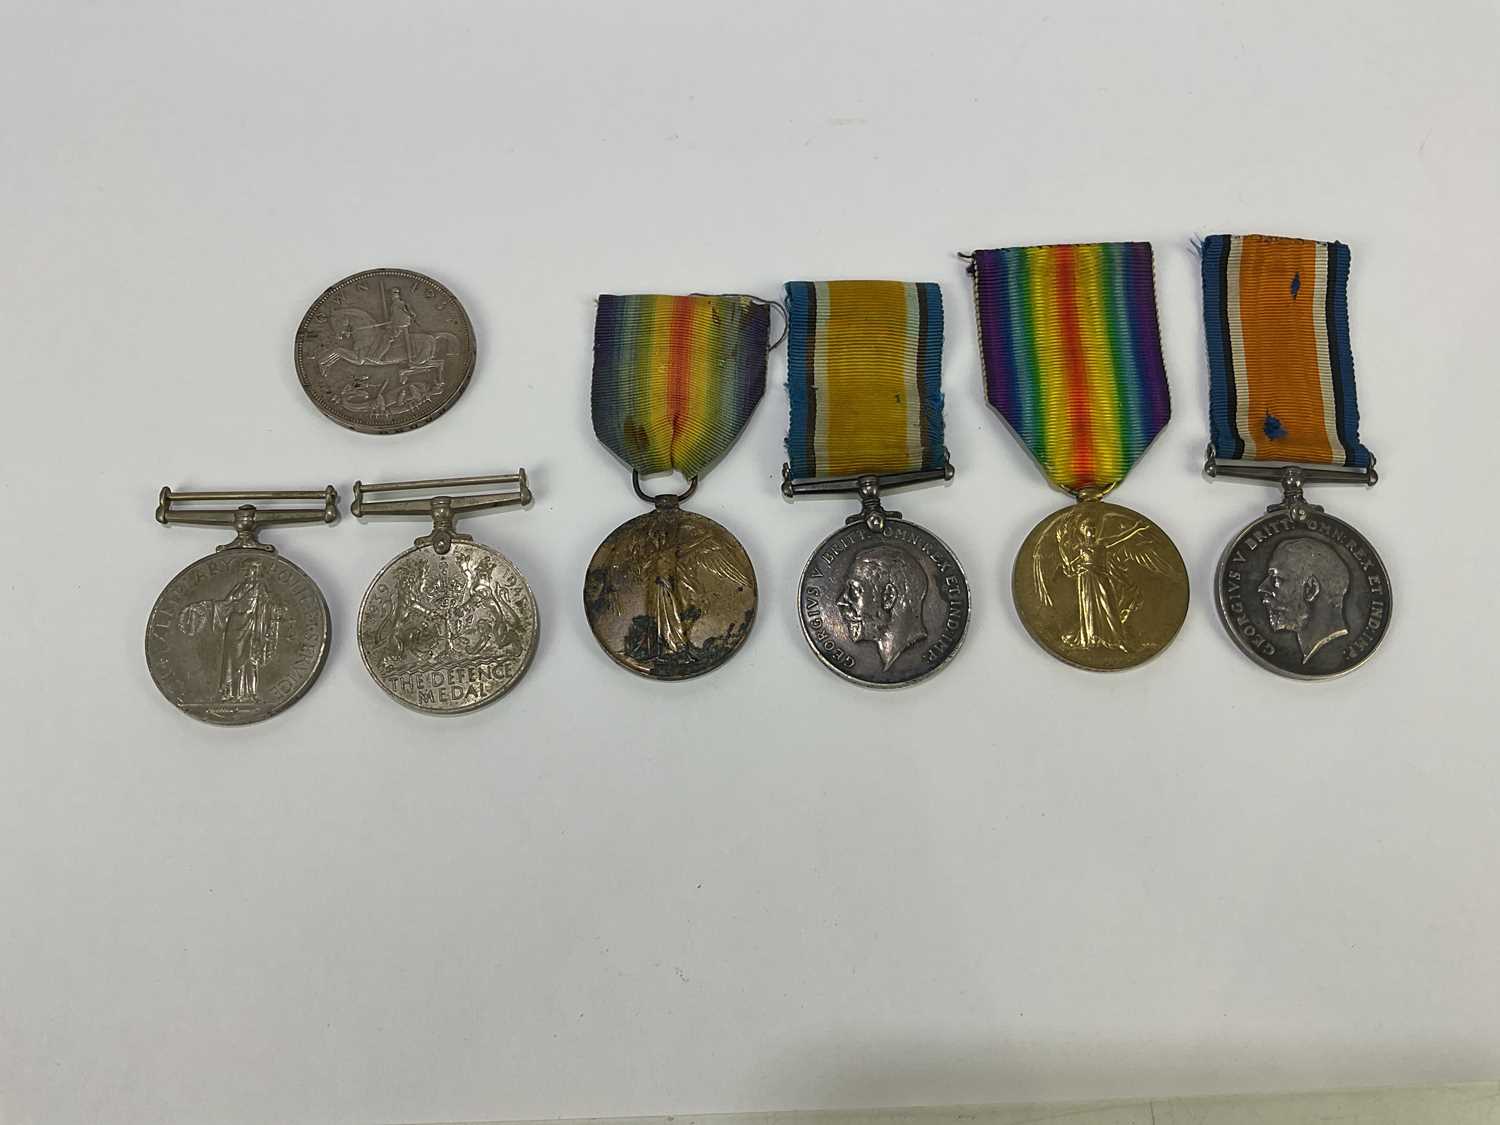 A WWI medal pair awarded to 6068 Pte J.J. Wills, 6 Lond.R., with a further WWI medal pair awarded